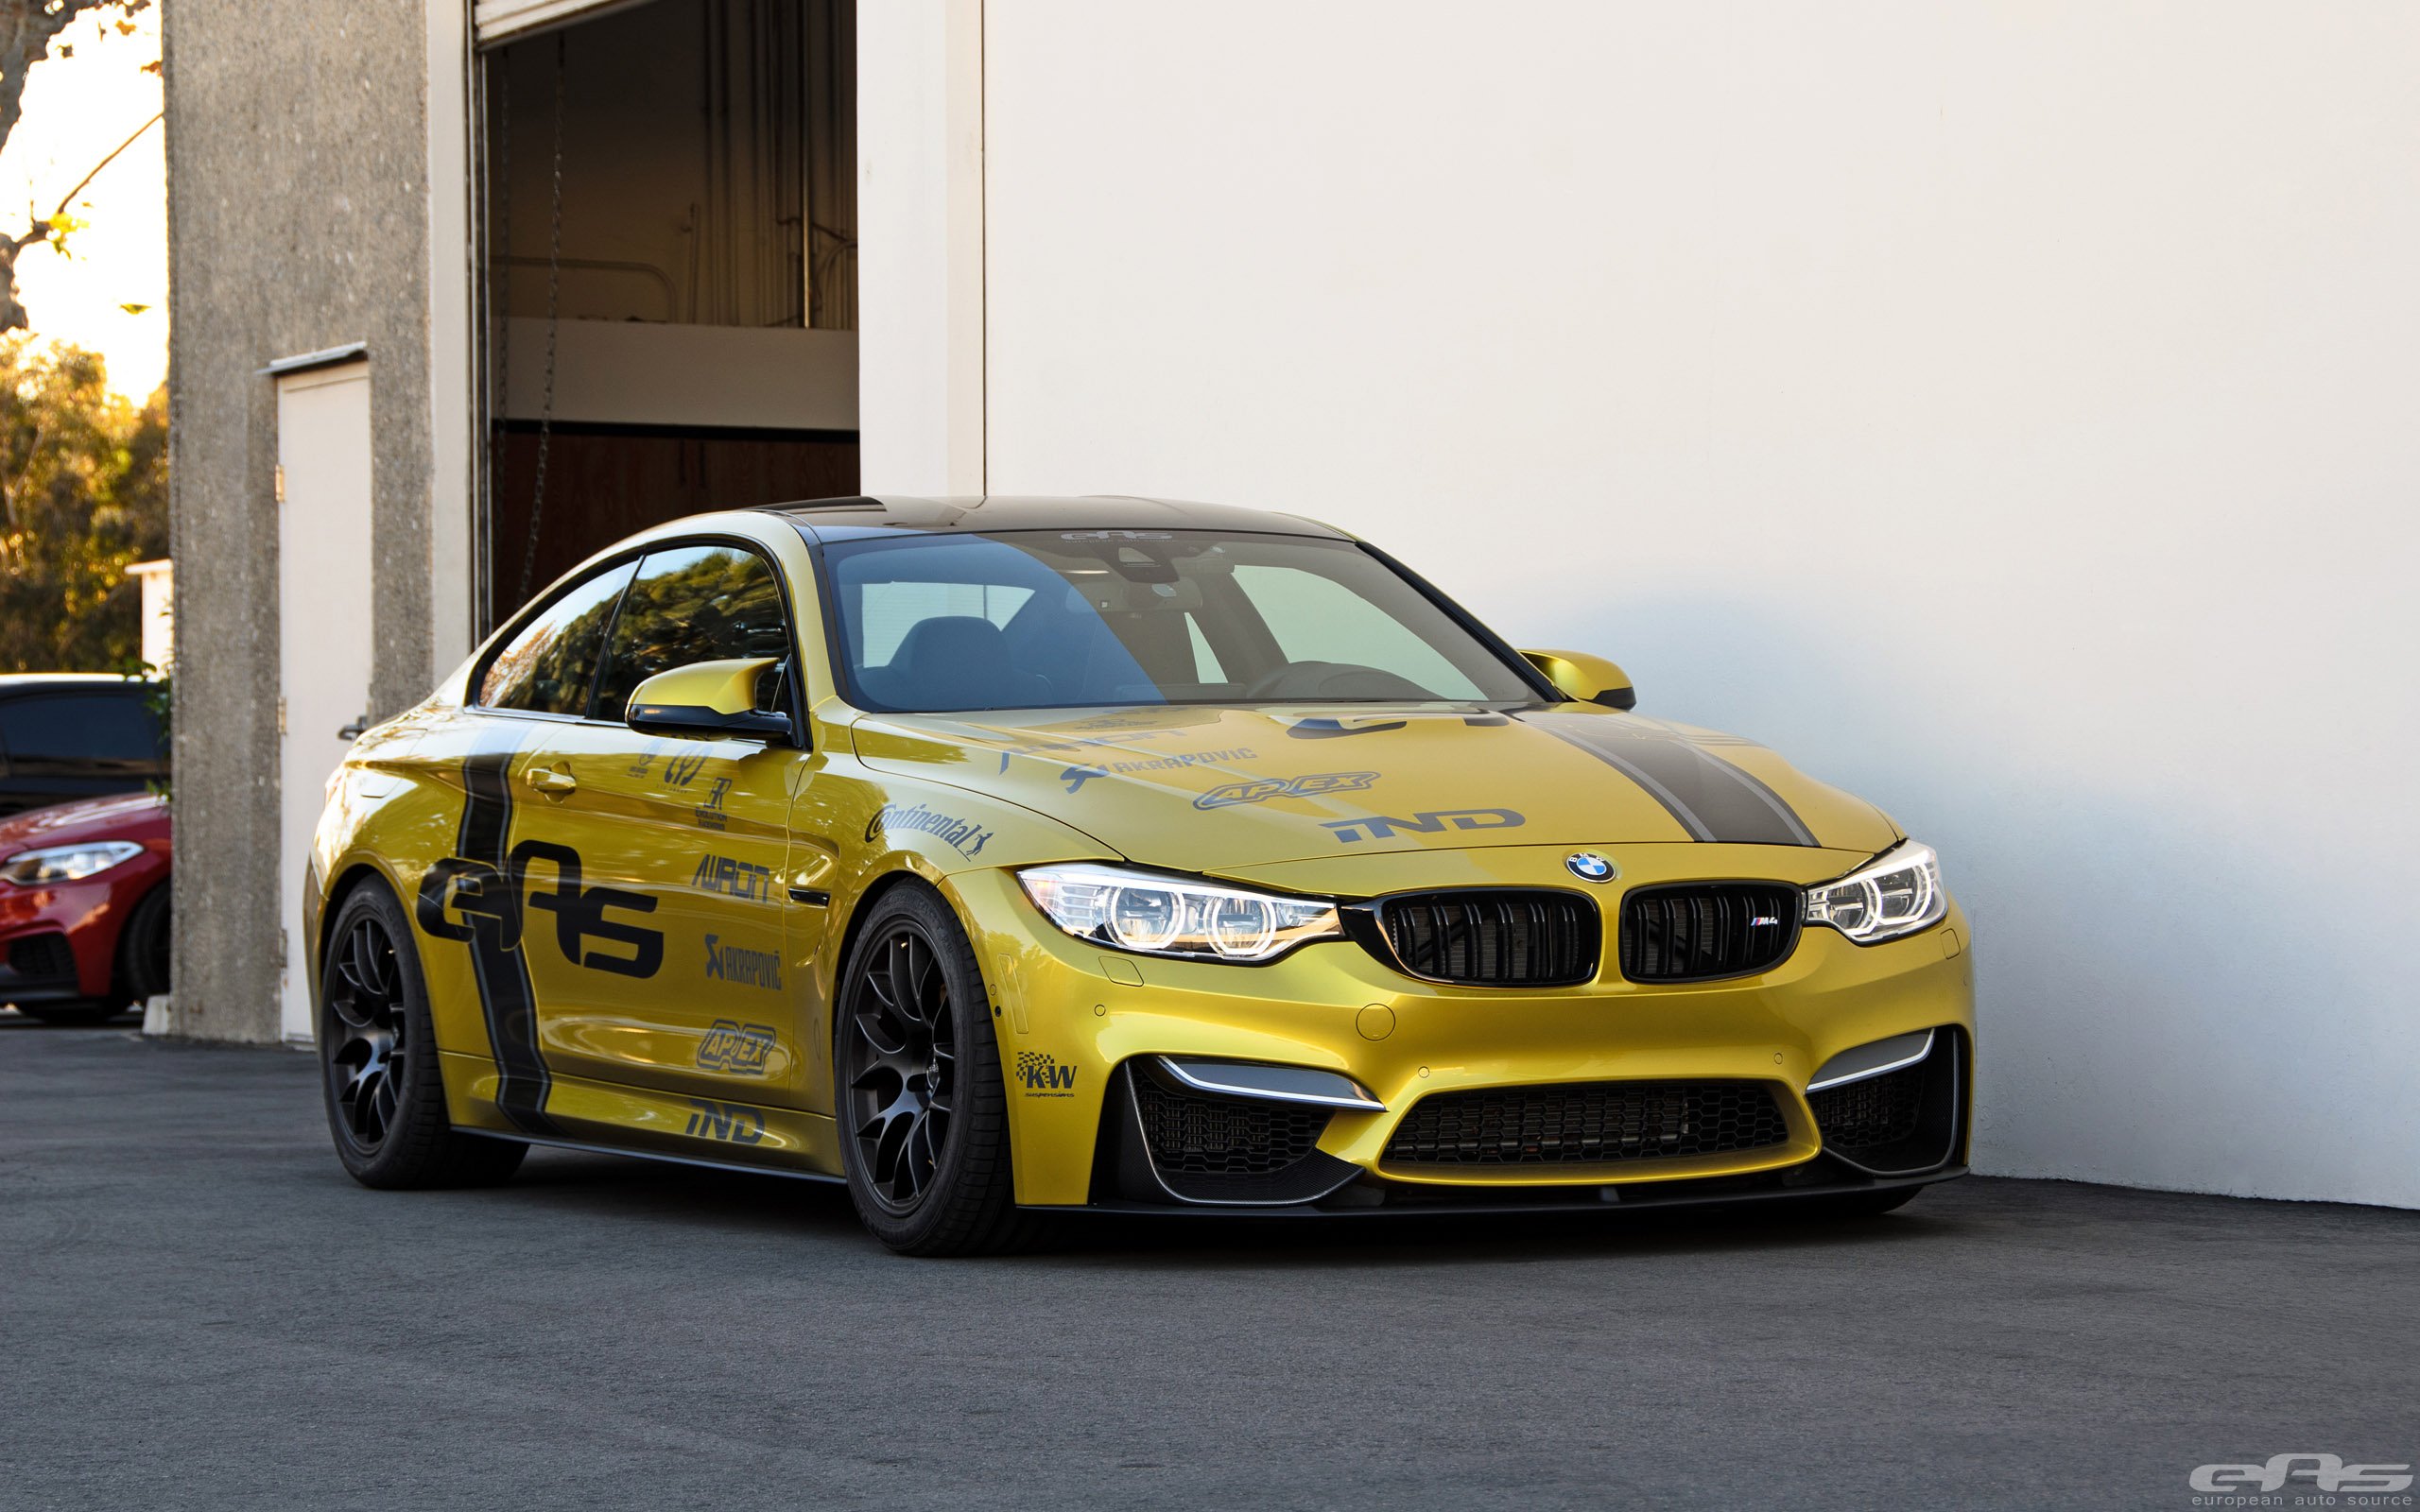 eas, K, W, Bmw, M, 4, Coupe, Cars, Tuning, 2015 Wallpaper